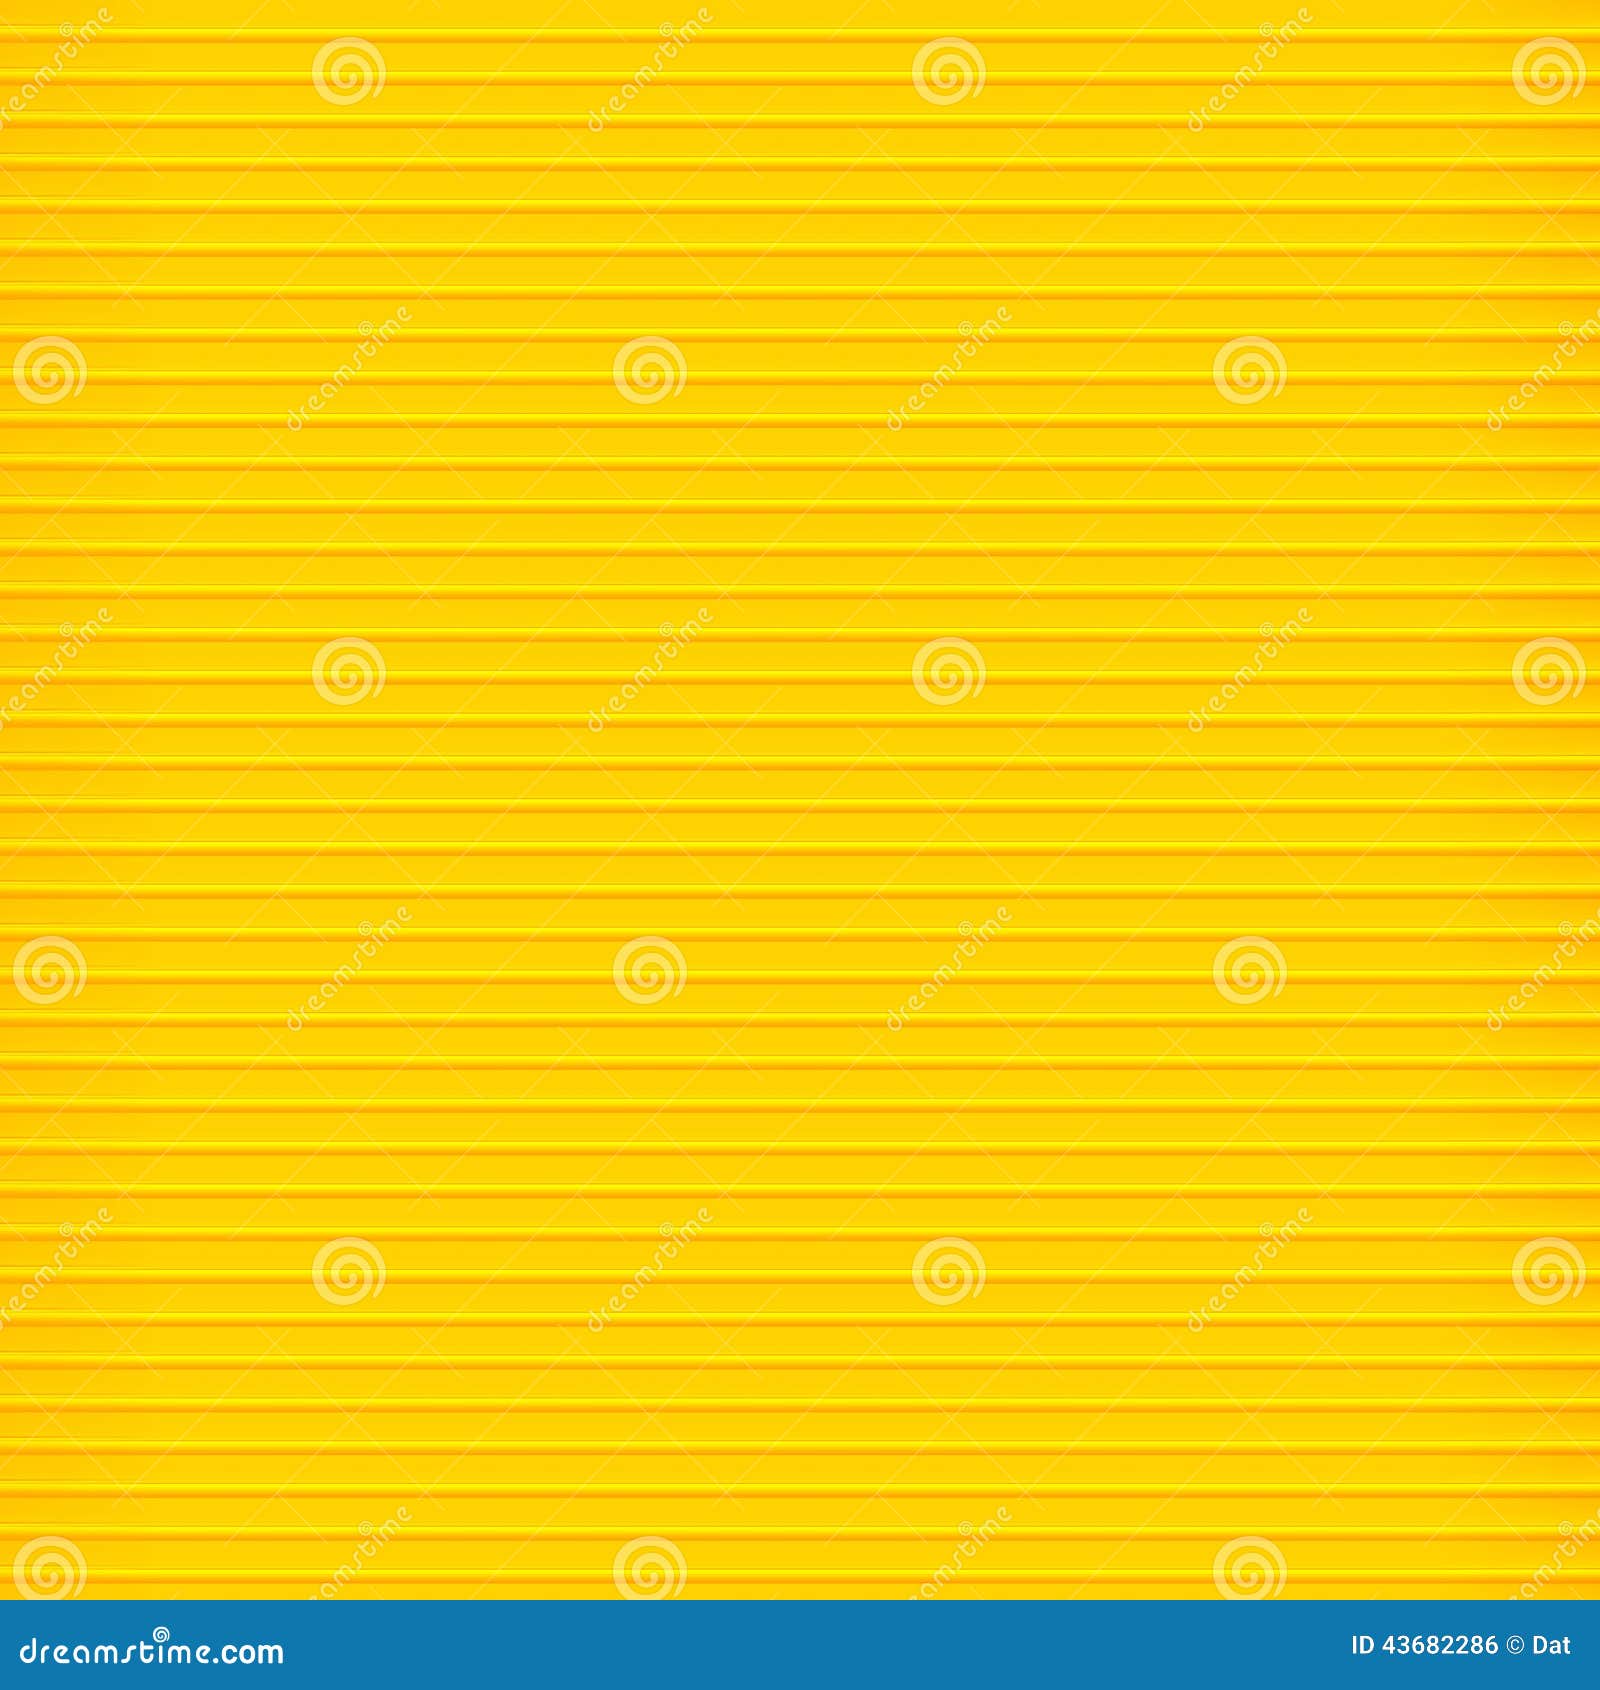 Details 100 yellow line background - Abzlocal.mx